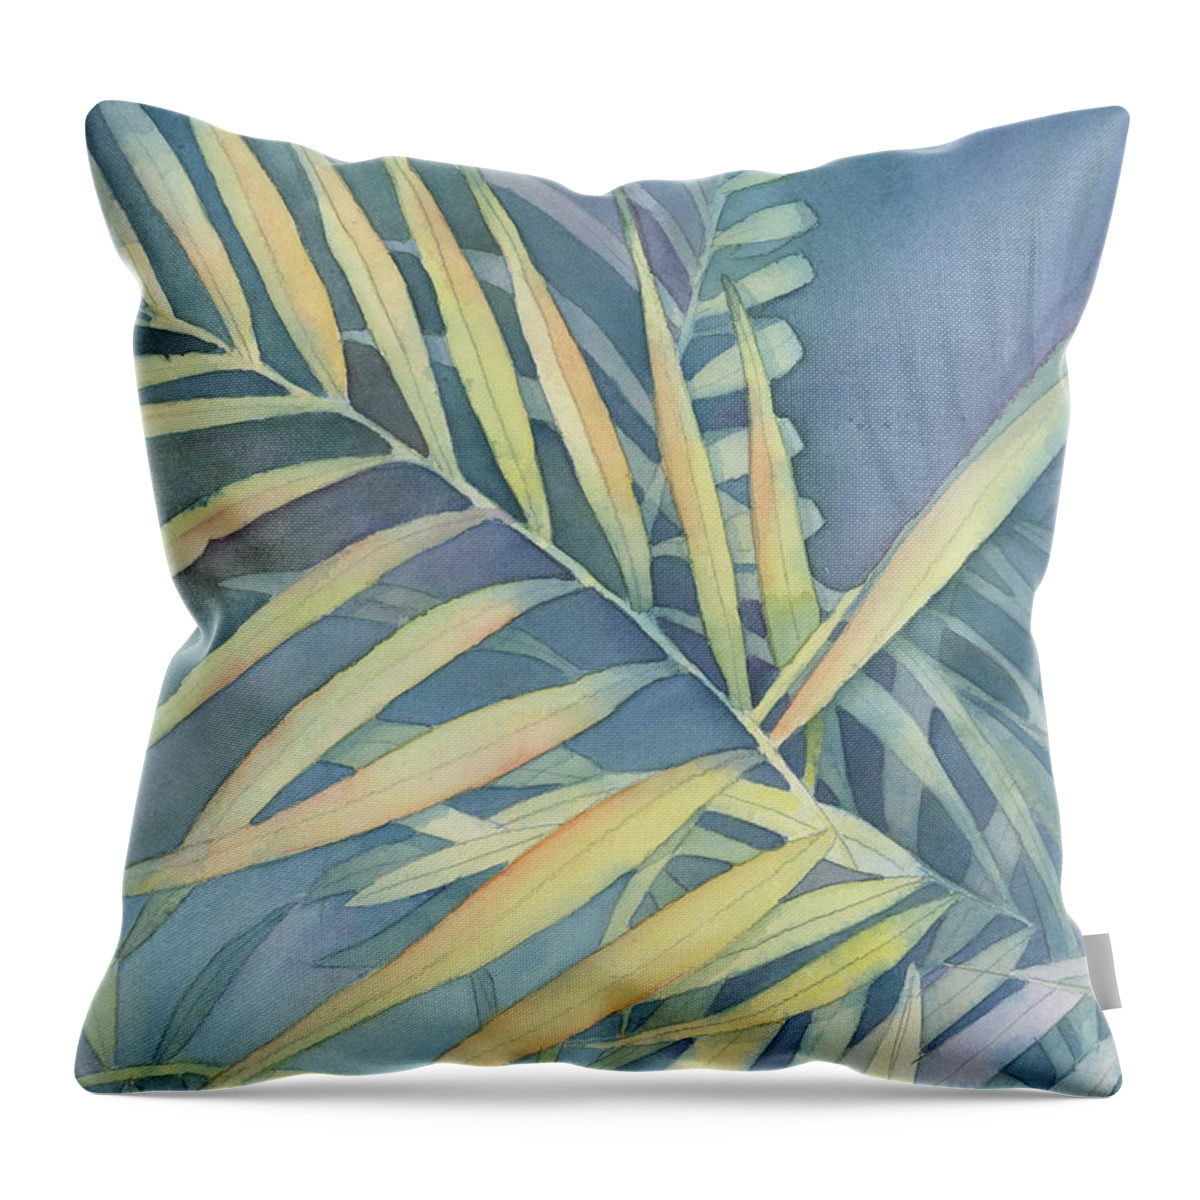 Facemask Throw Pillow featuring the painting Tranquility by Lois Blasberg